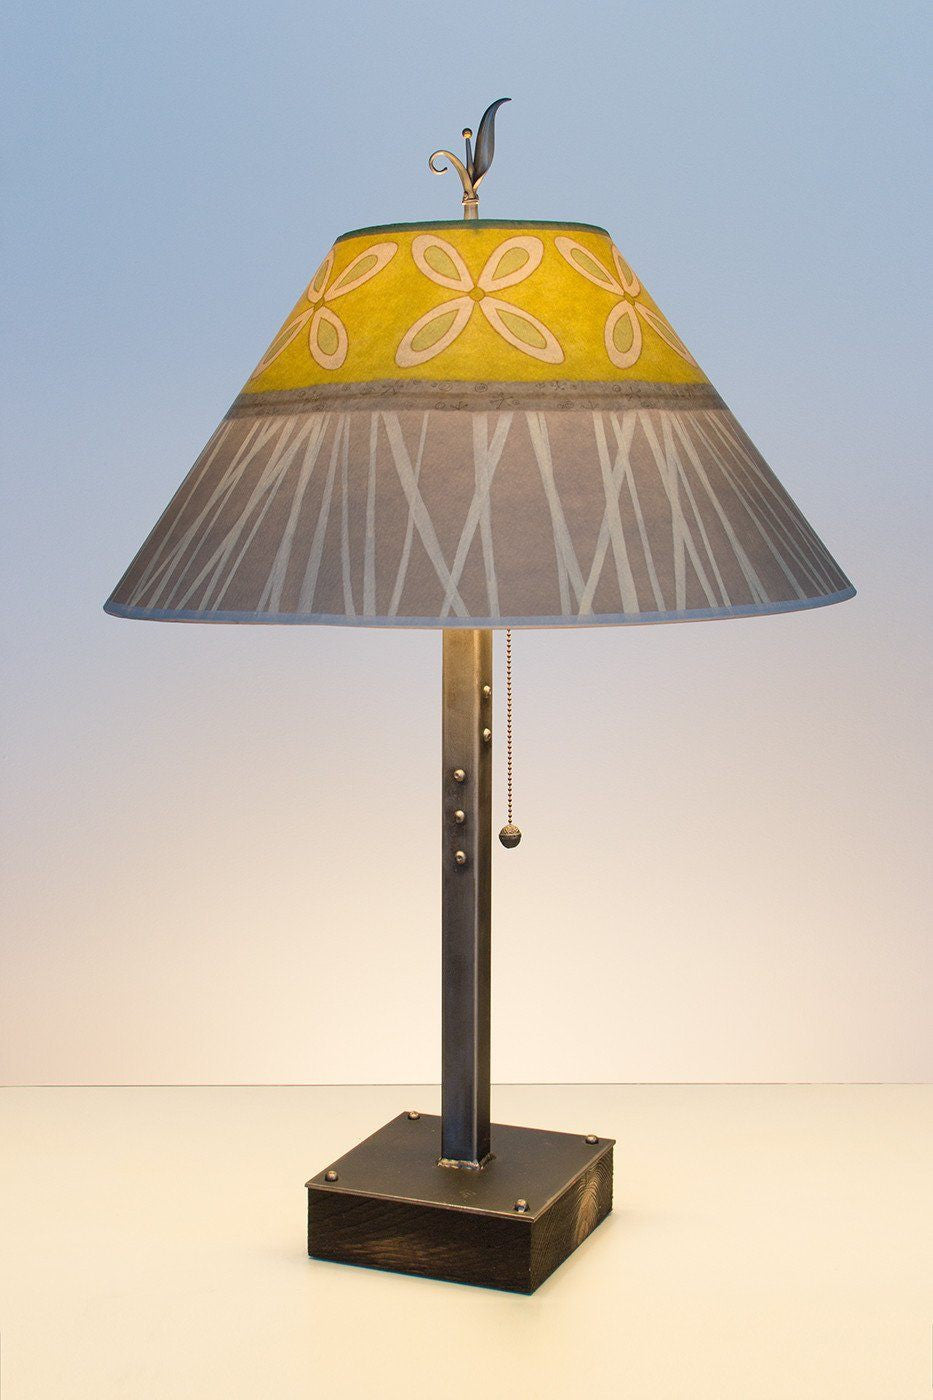 Janna Ugone &amp; Co Table Lamps Steel Table Lamp on Wood with Large Conical Shade in Kiwi